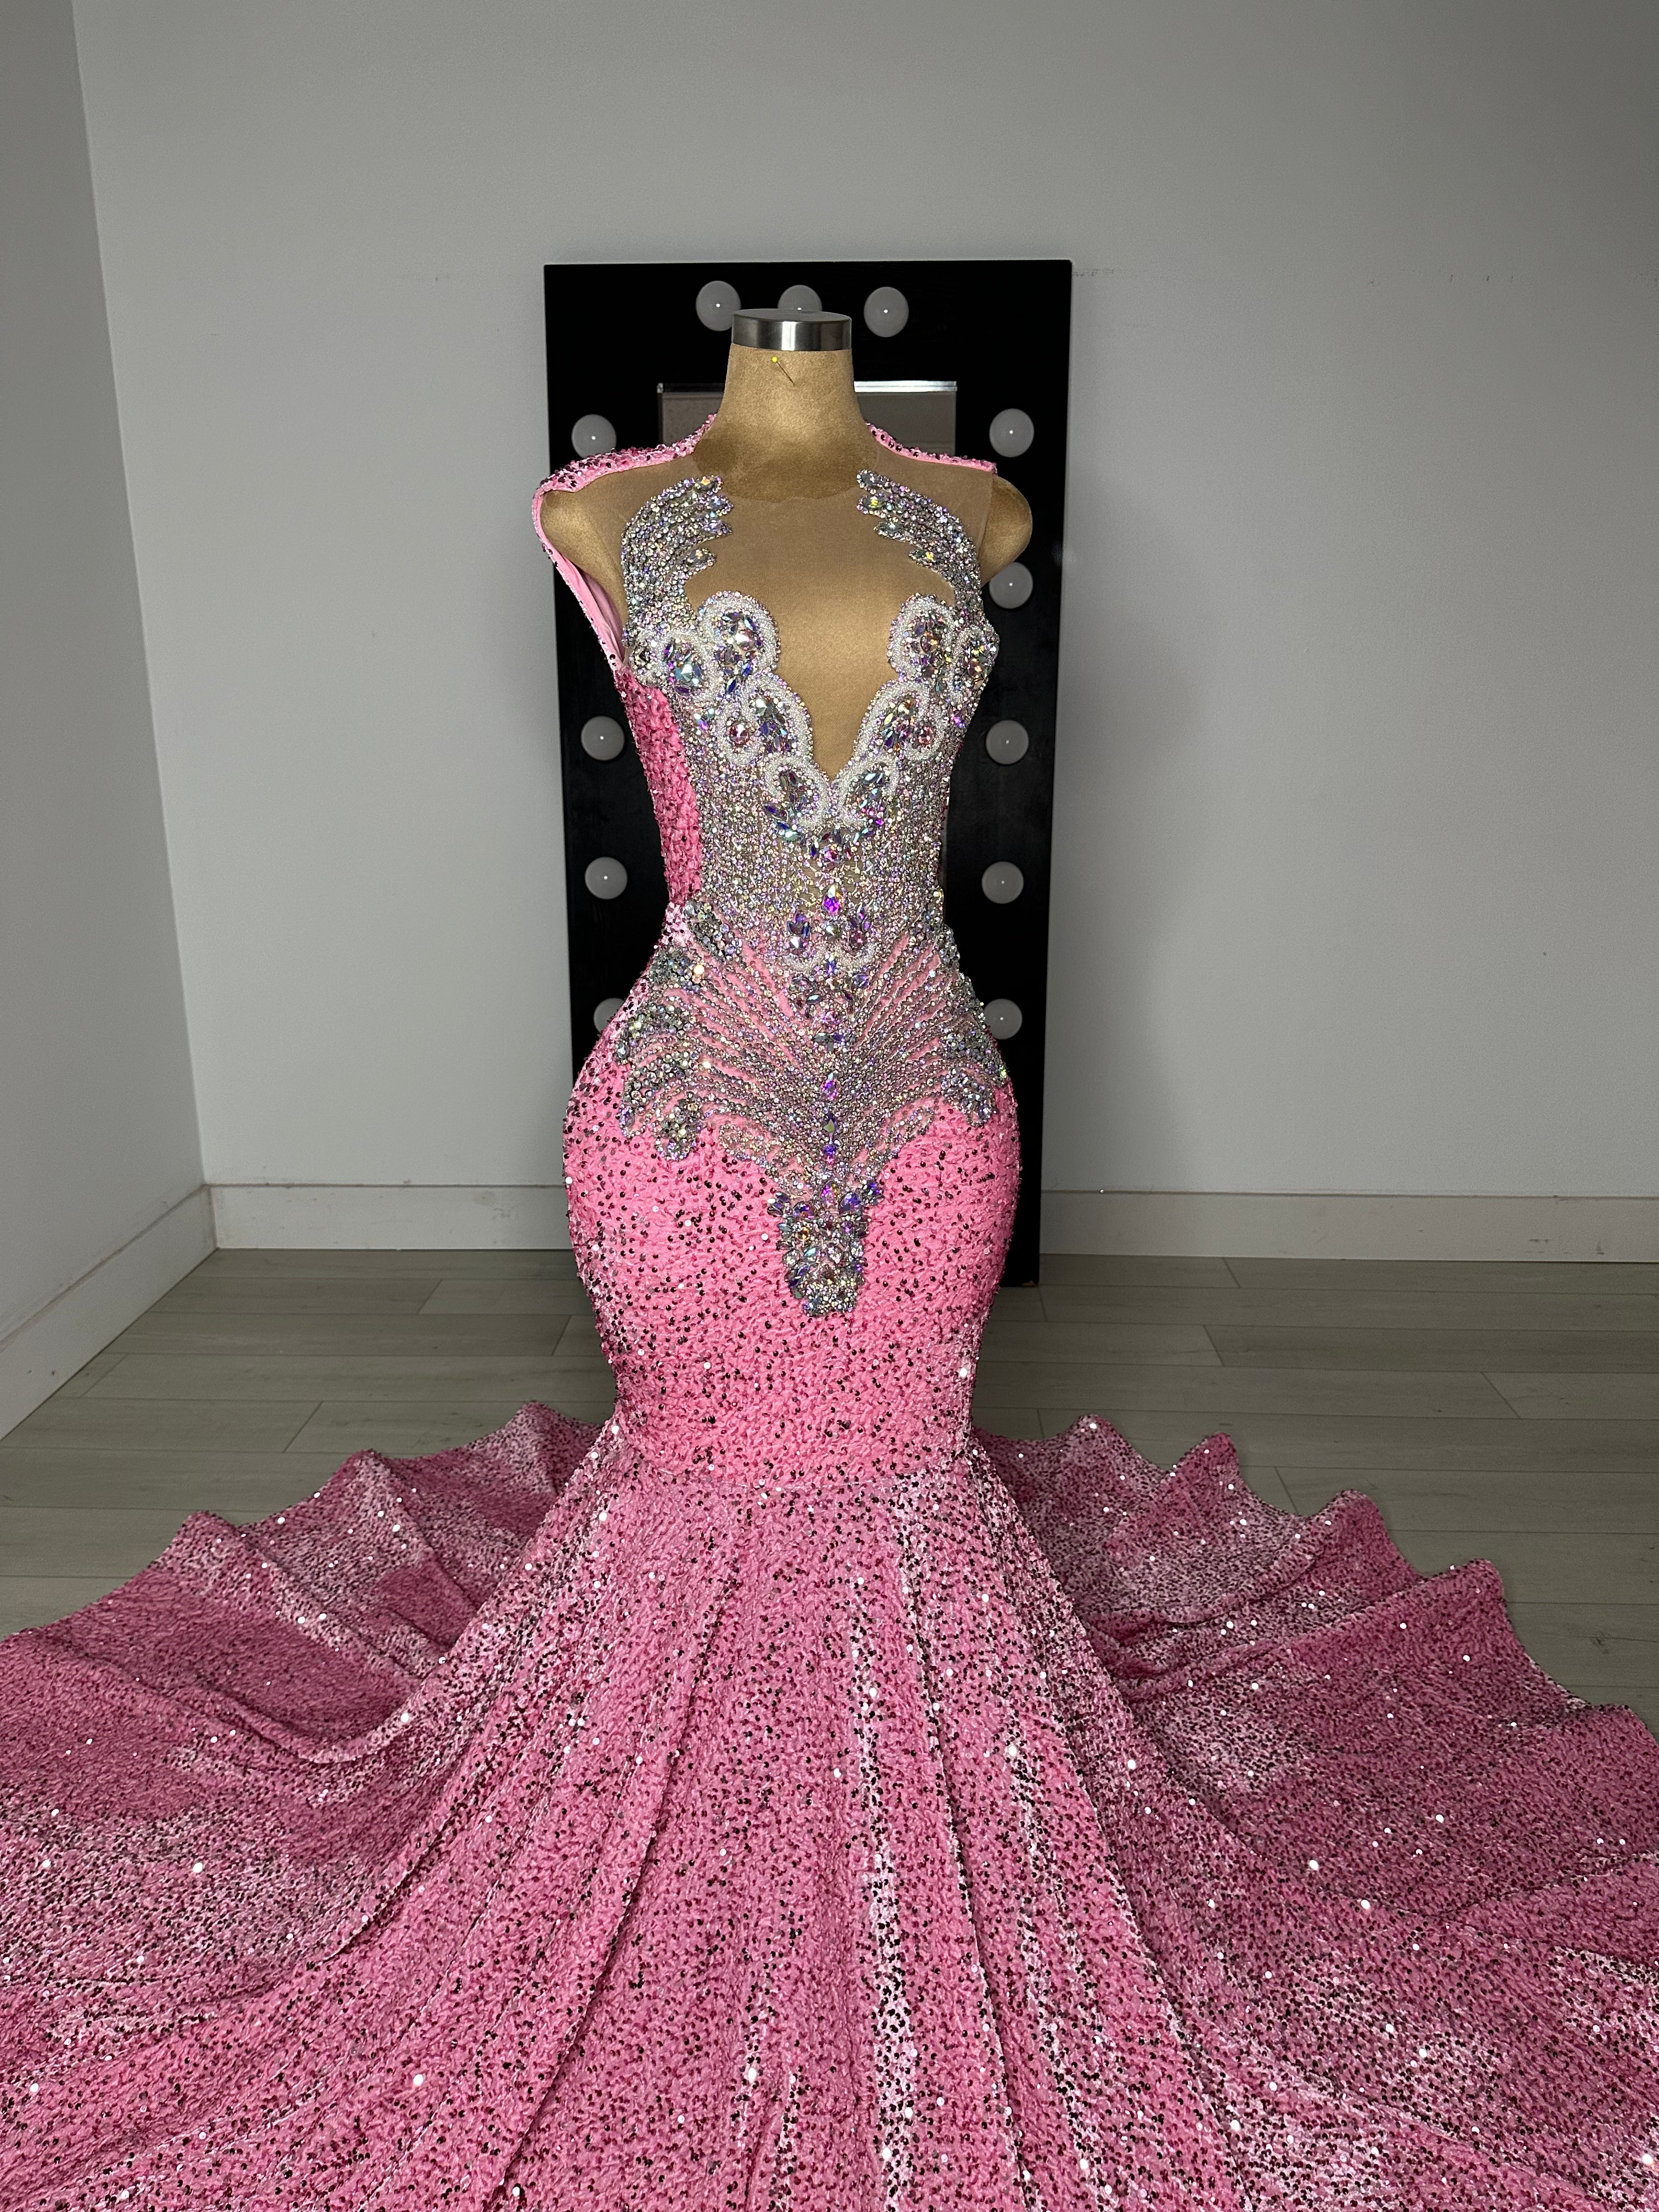 LIYAH - Iridescent Pink Sequins Prom Dress with Iridescent Rhinestones | Pre-Order  SHIP: 03/29 - 04/05